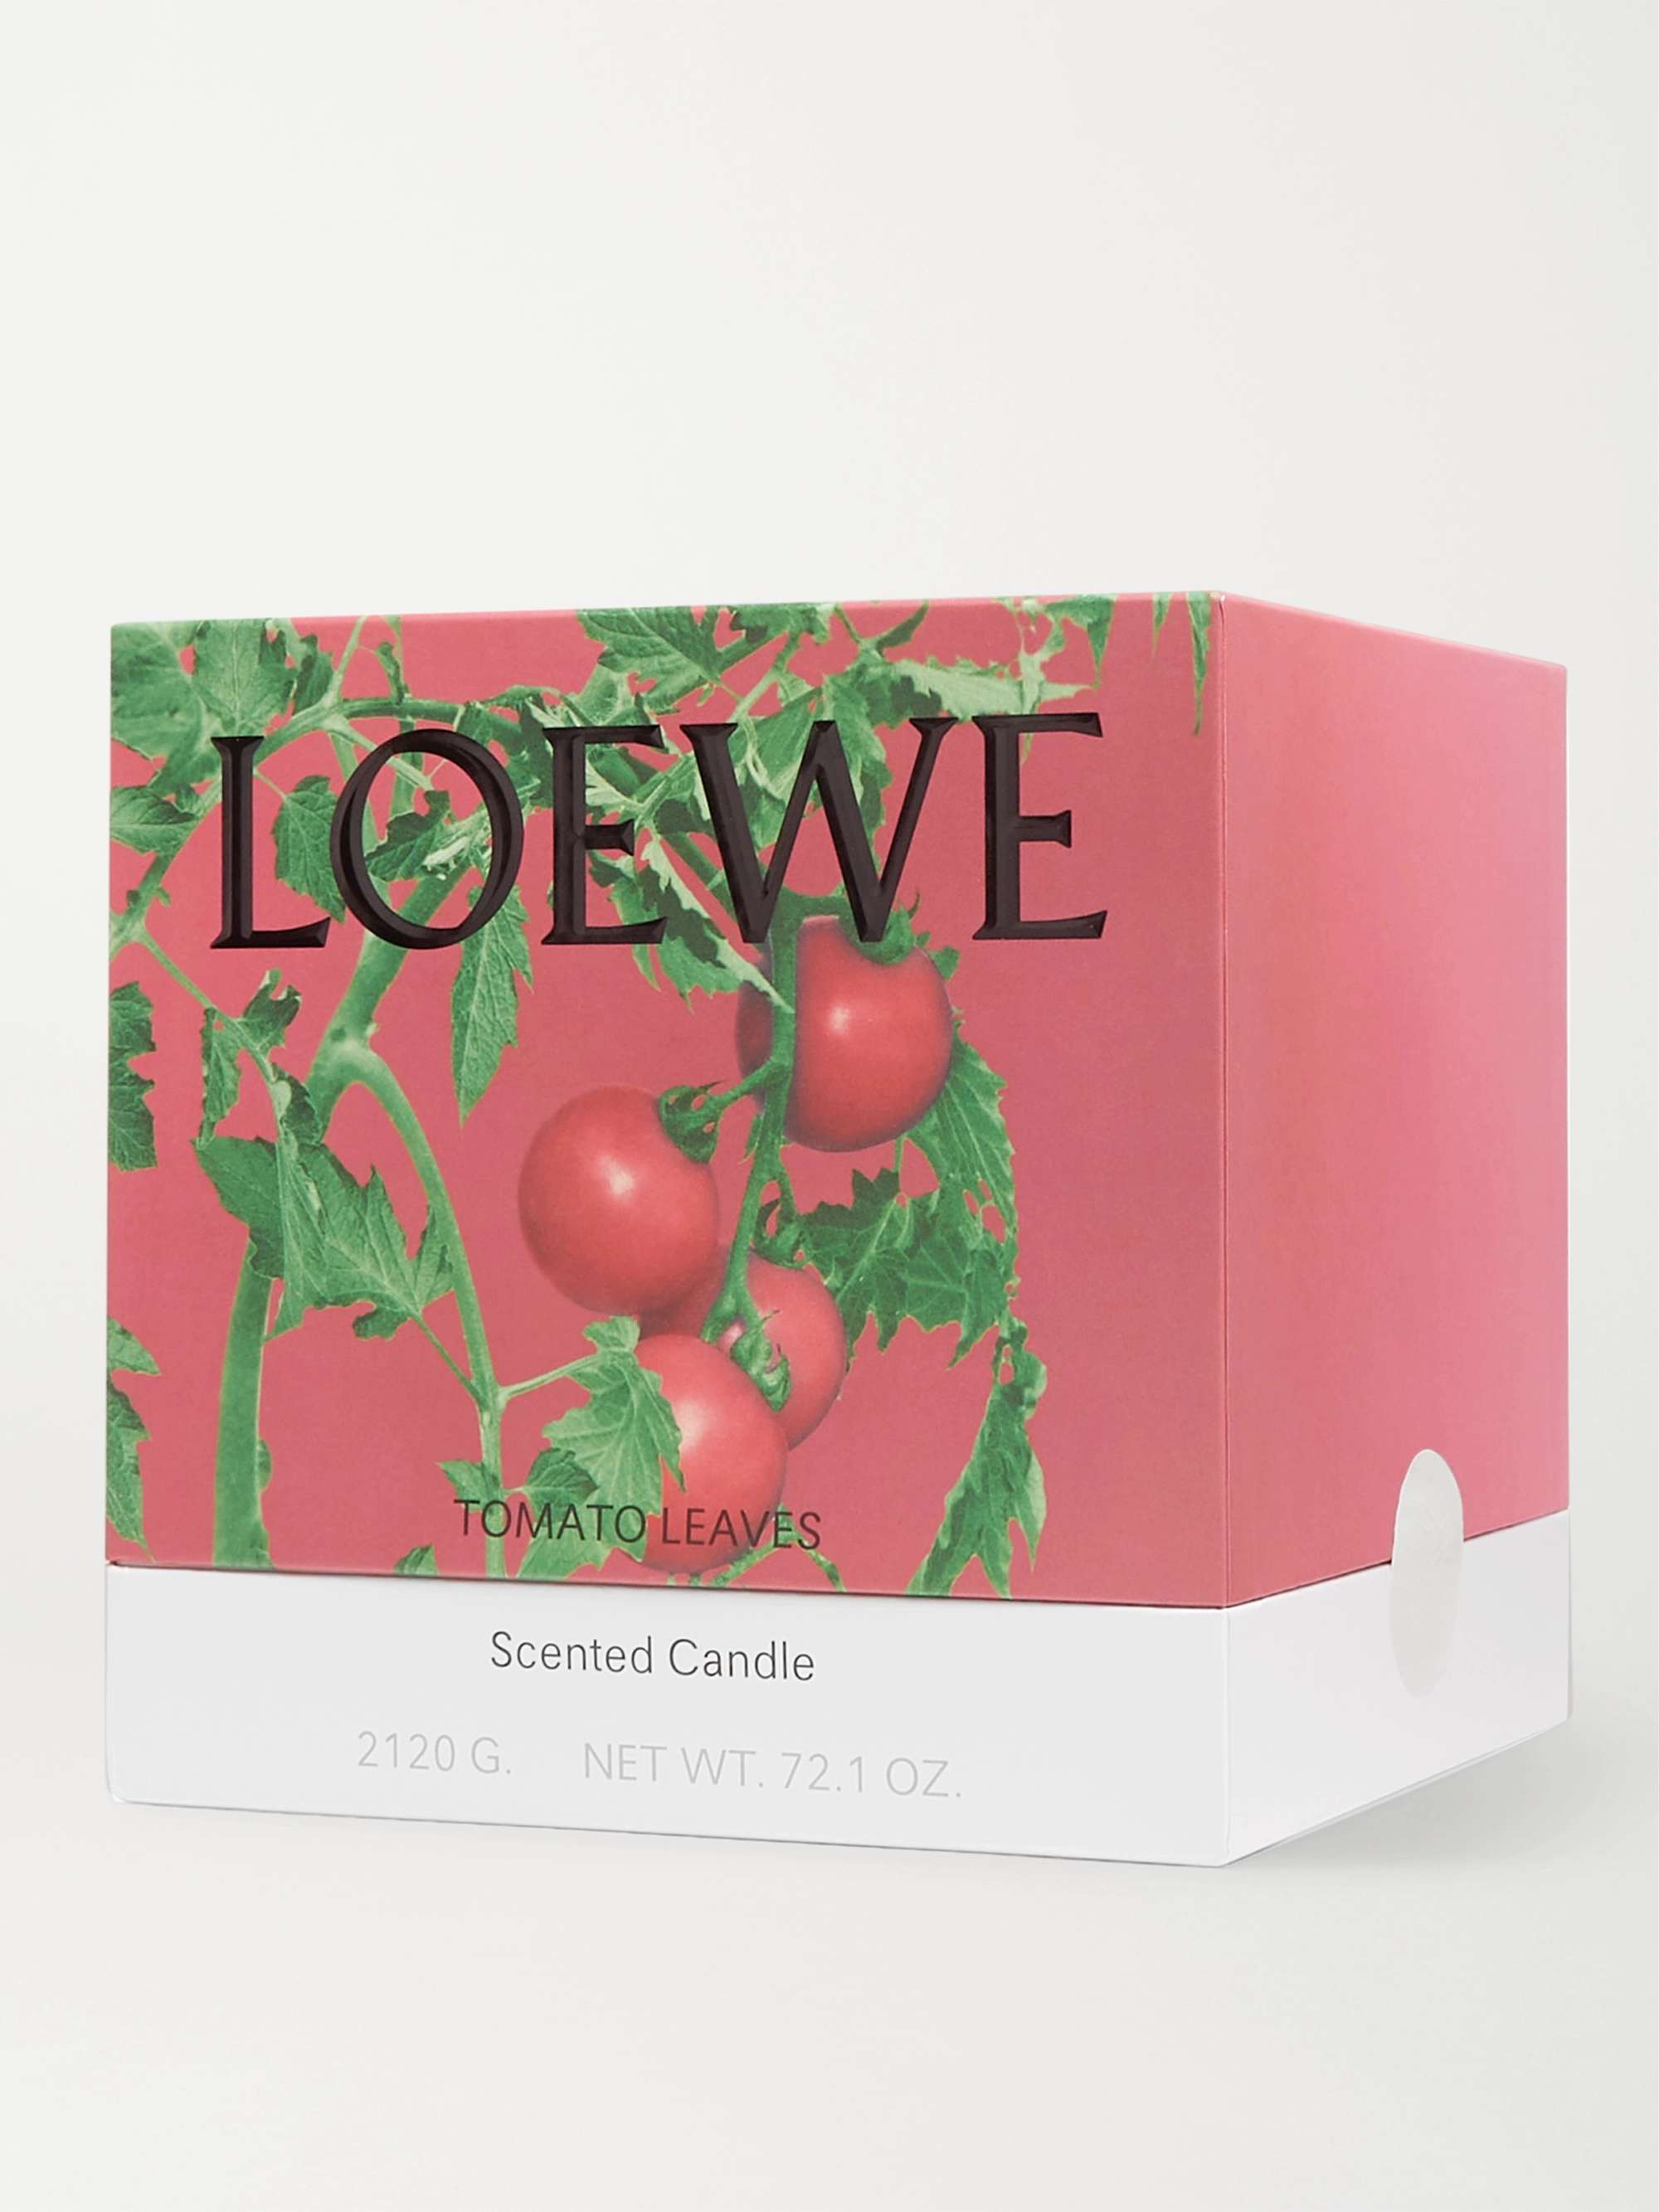 LOEWE HOME SCENTS Tomato Leaves Scented Candle, 2120g